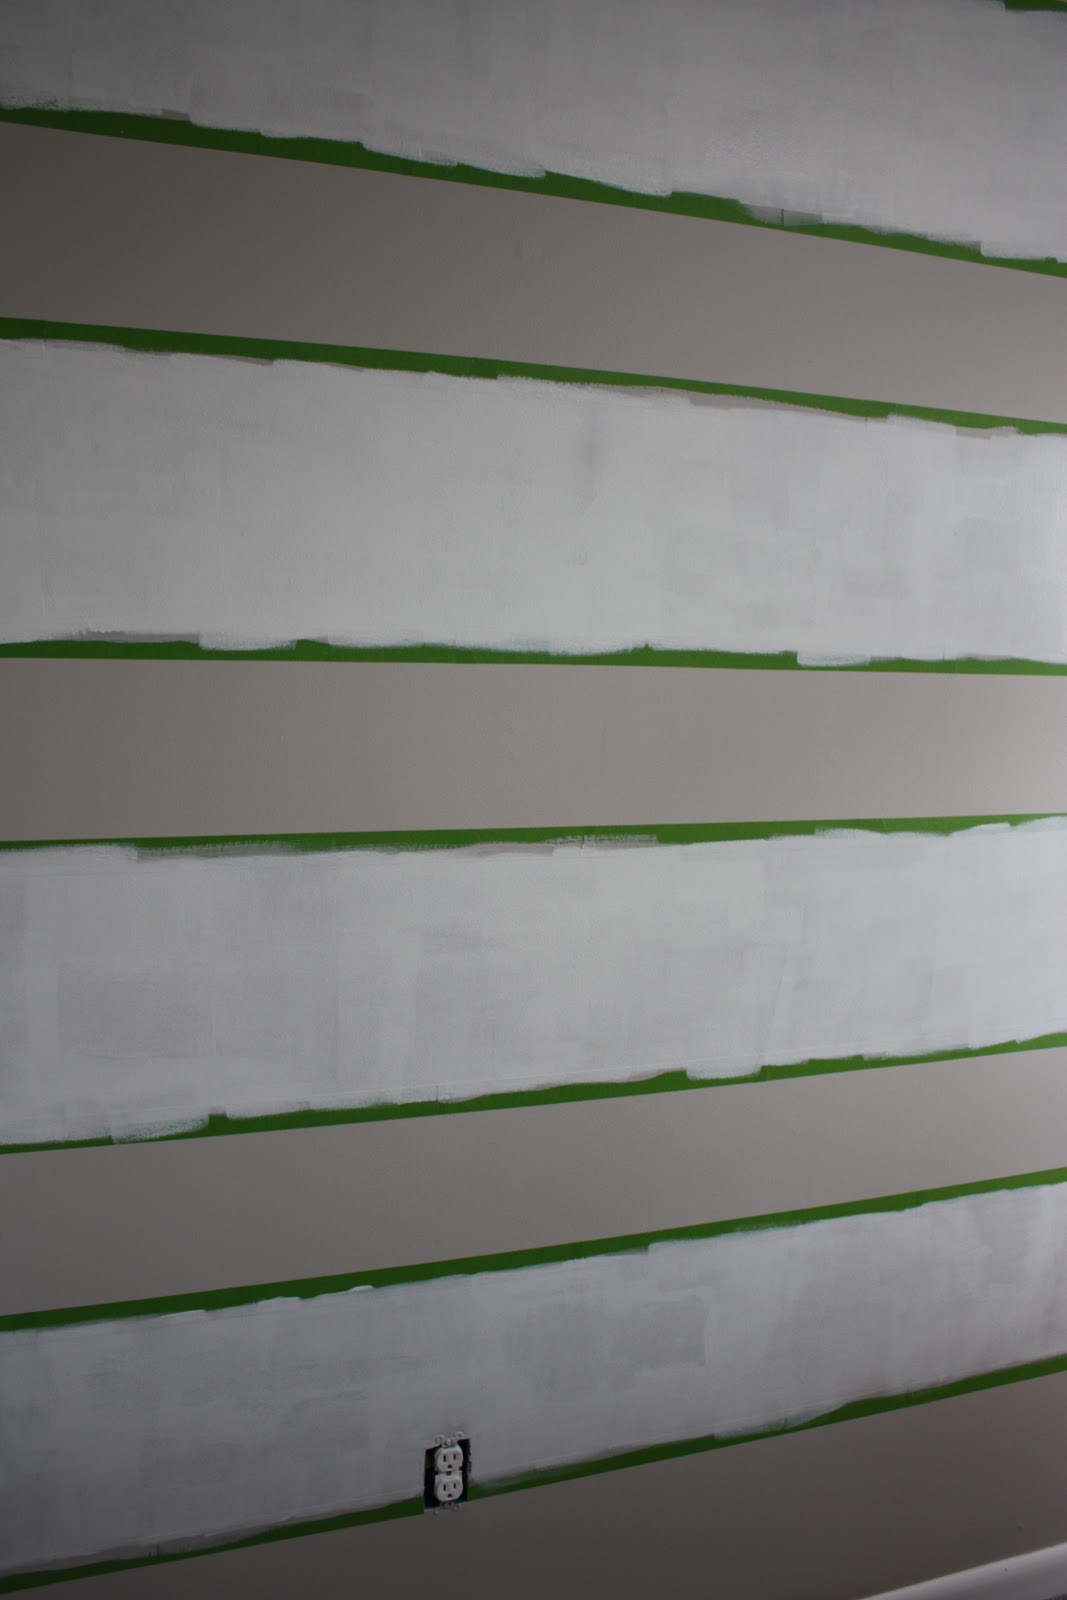 How to Paint Stripes on a Wall